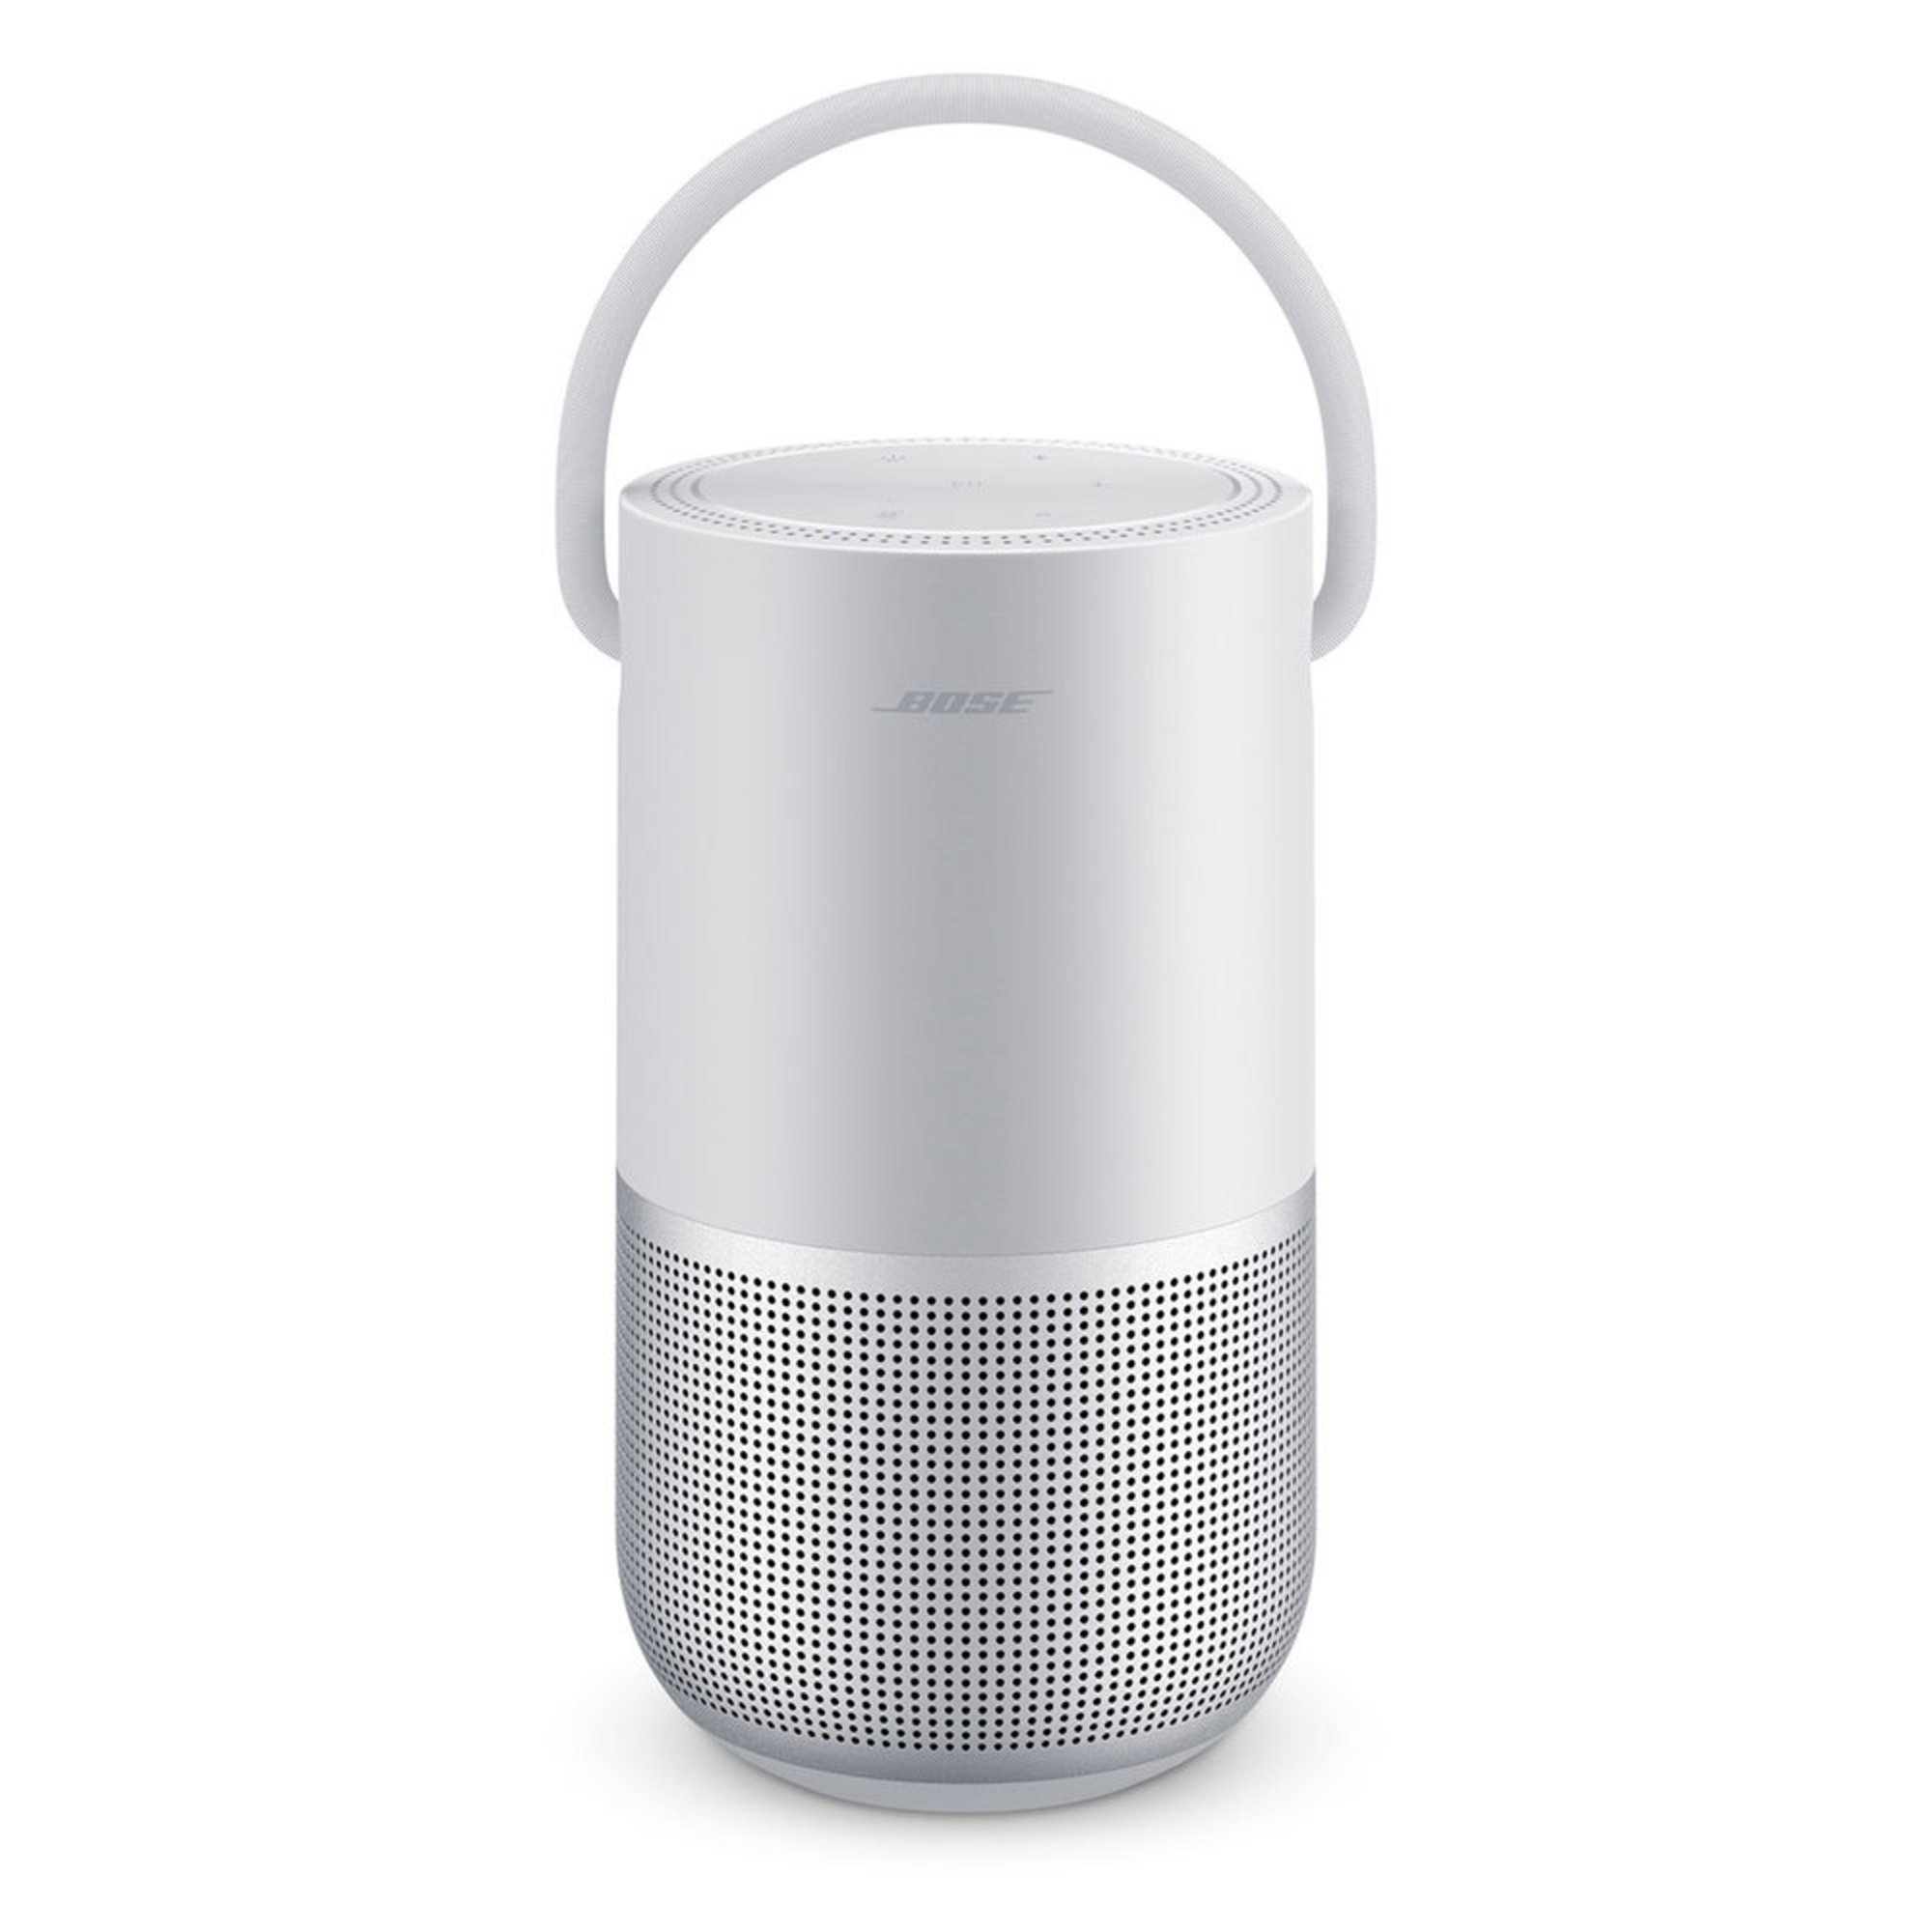 bose voice activated speaker